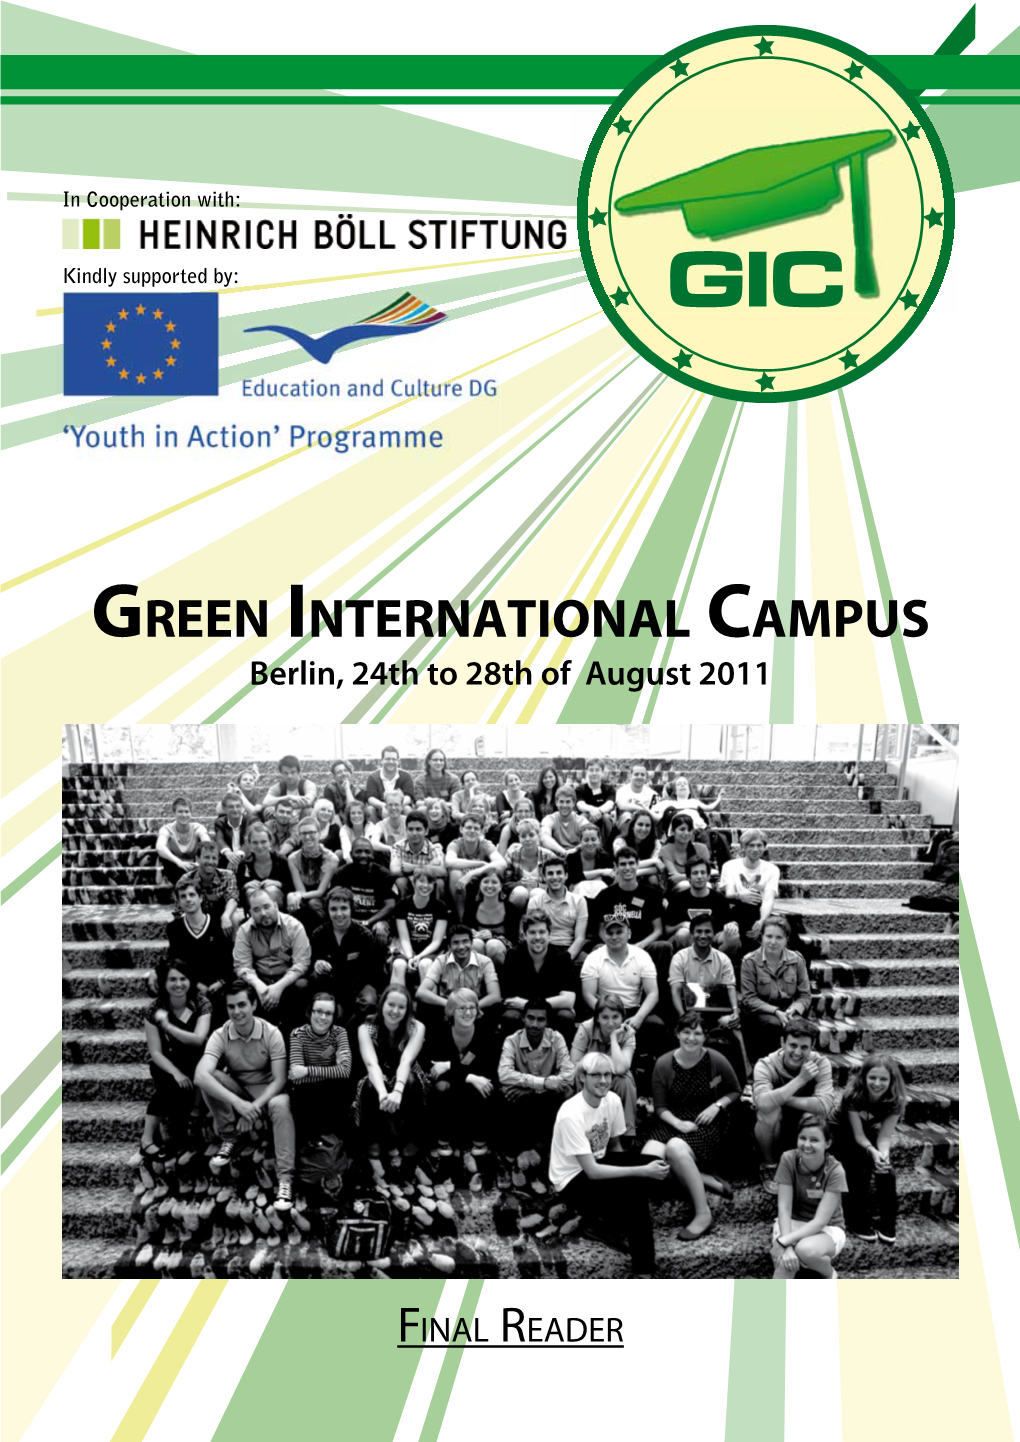 GREEN INTERNATIONAL CAMPUS Berlin, 24Th to 28Th of August 2011